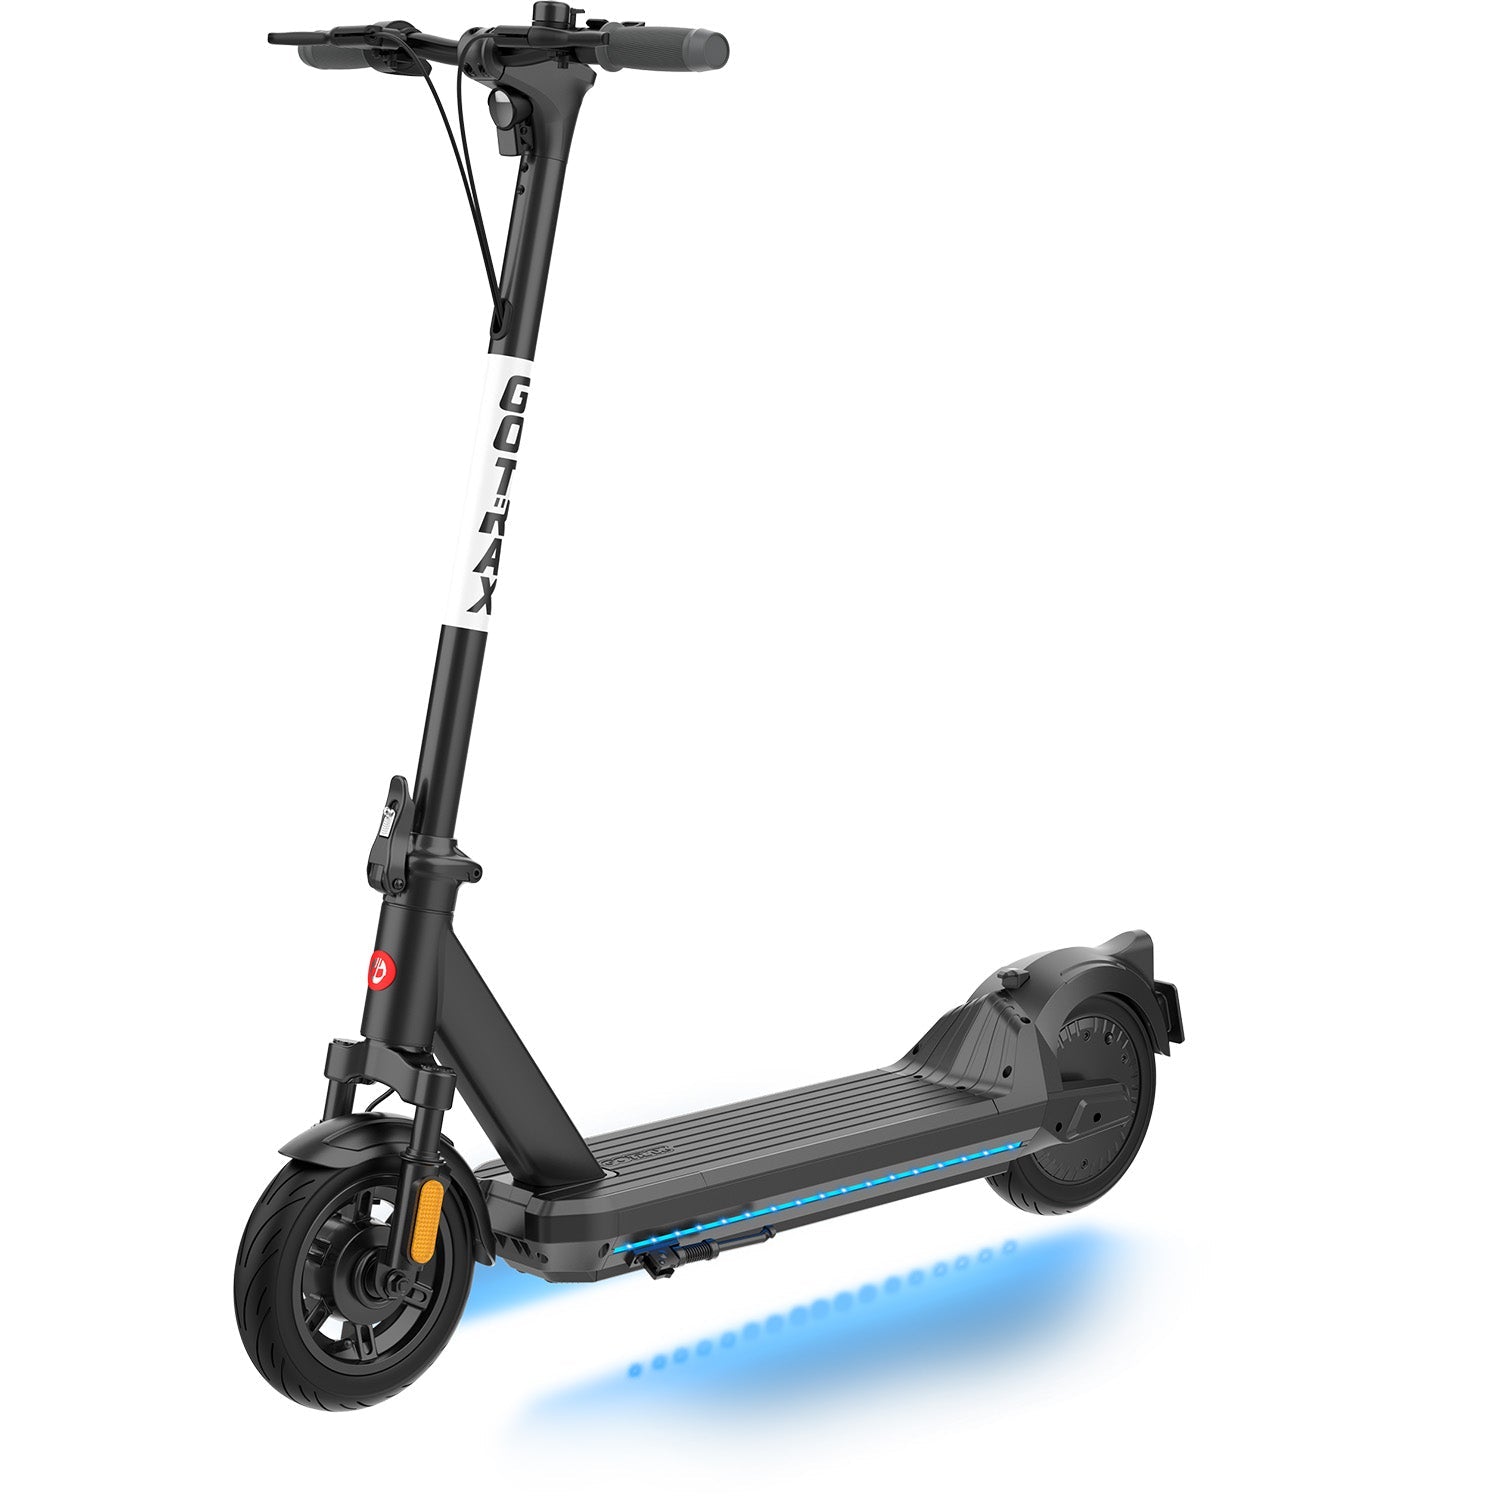 Introducing the Eclipse Electric Scooter - GOTRAX